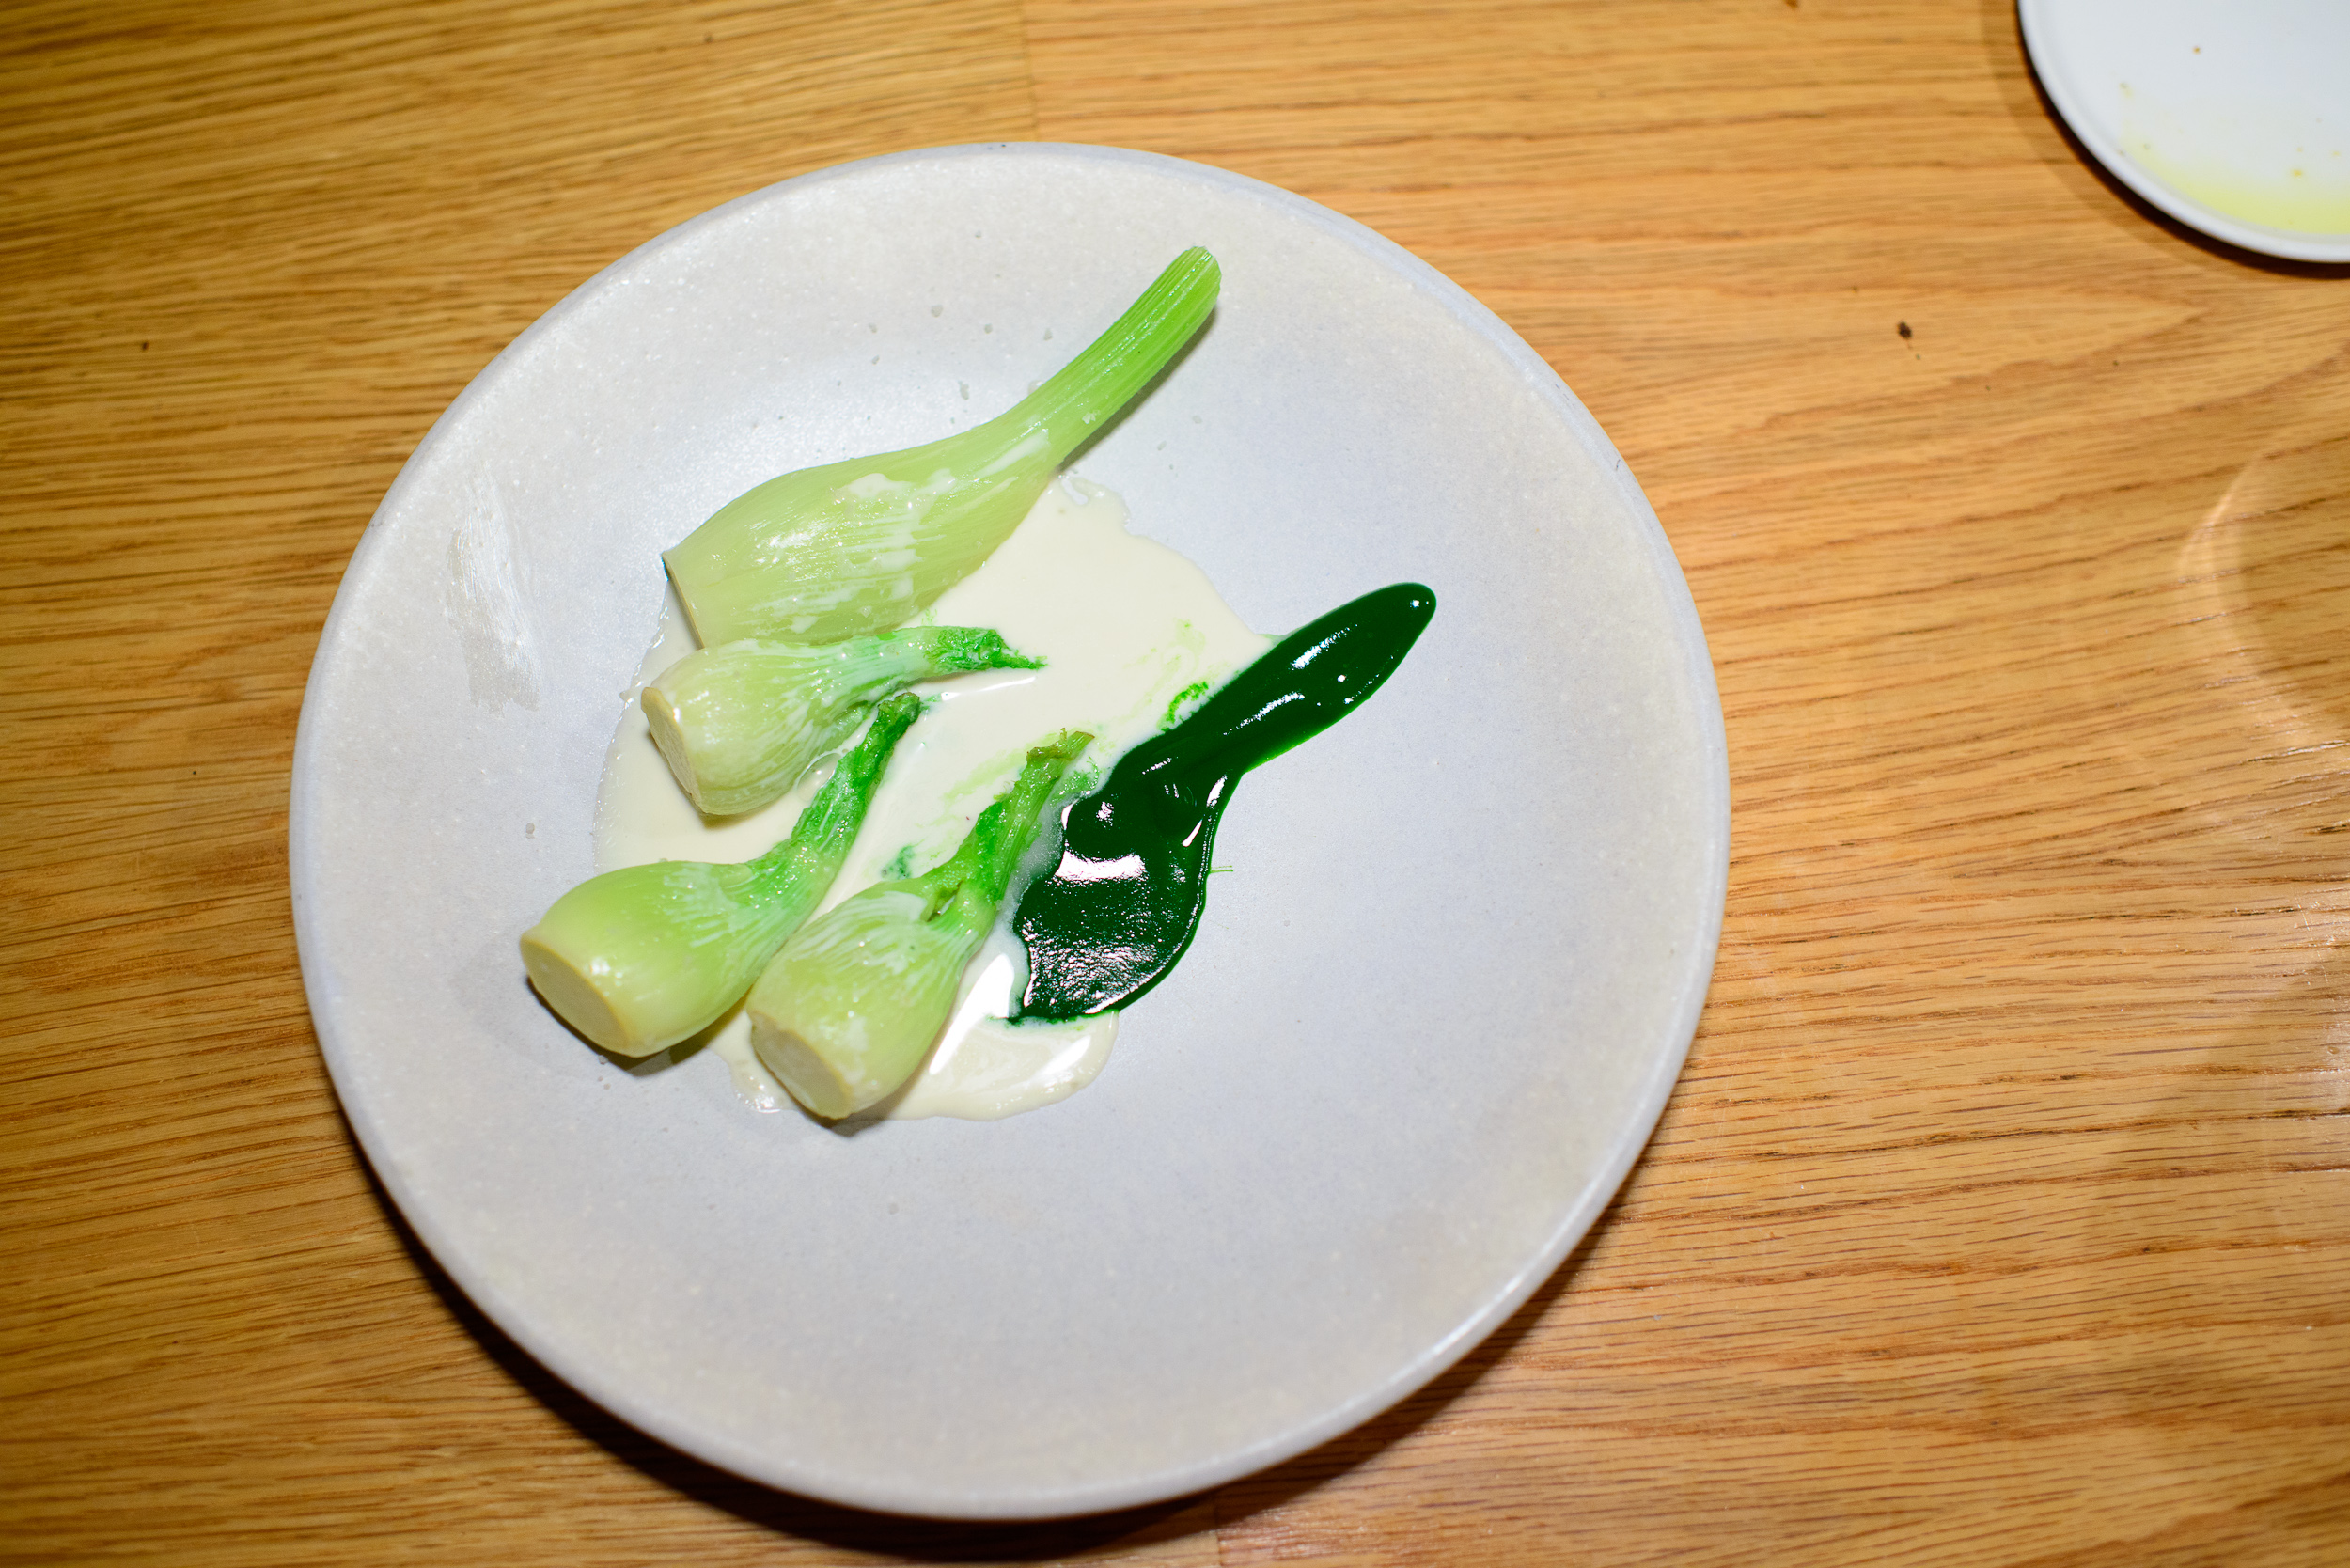 5th Course: Fennel bulbs, smoked almond milk, parsley purée